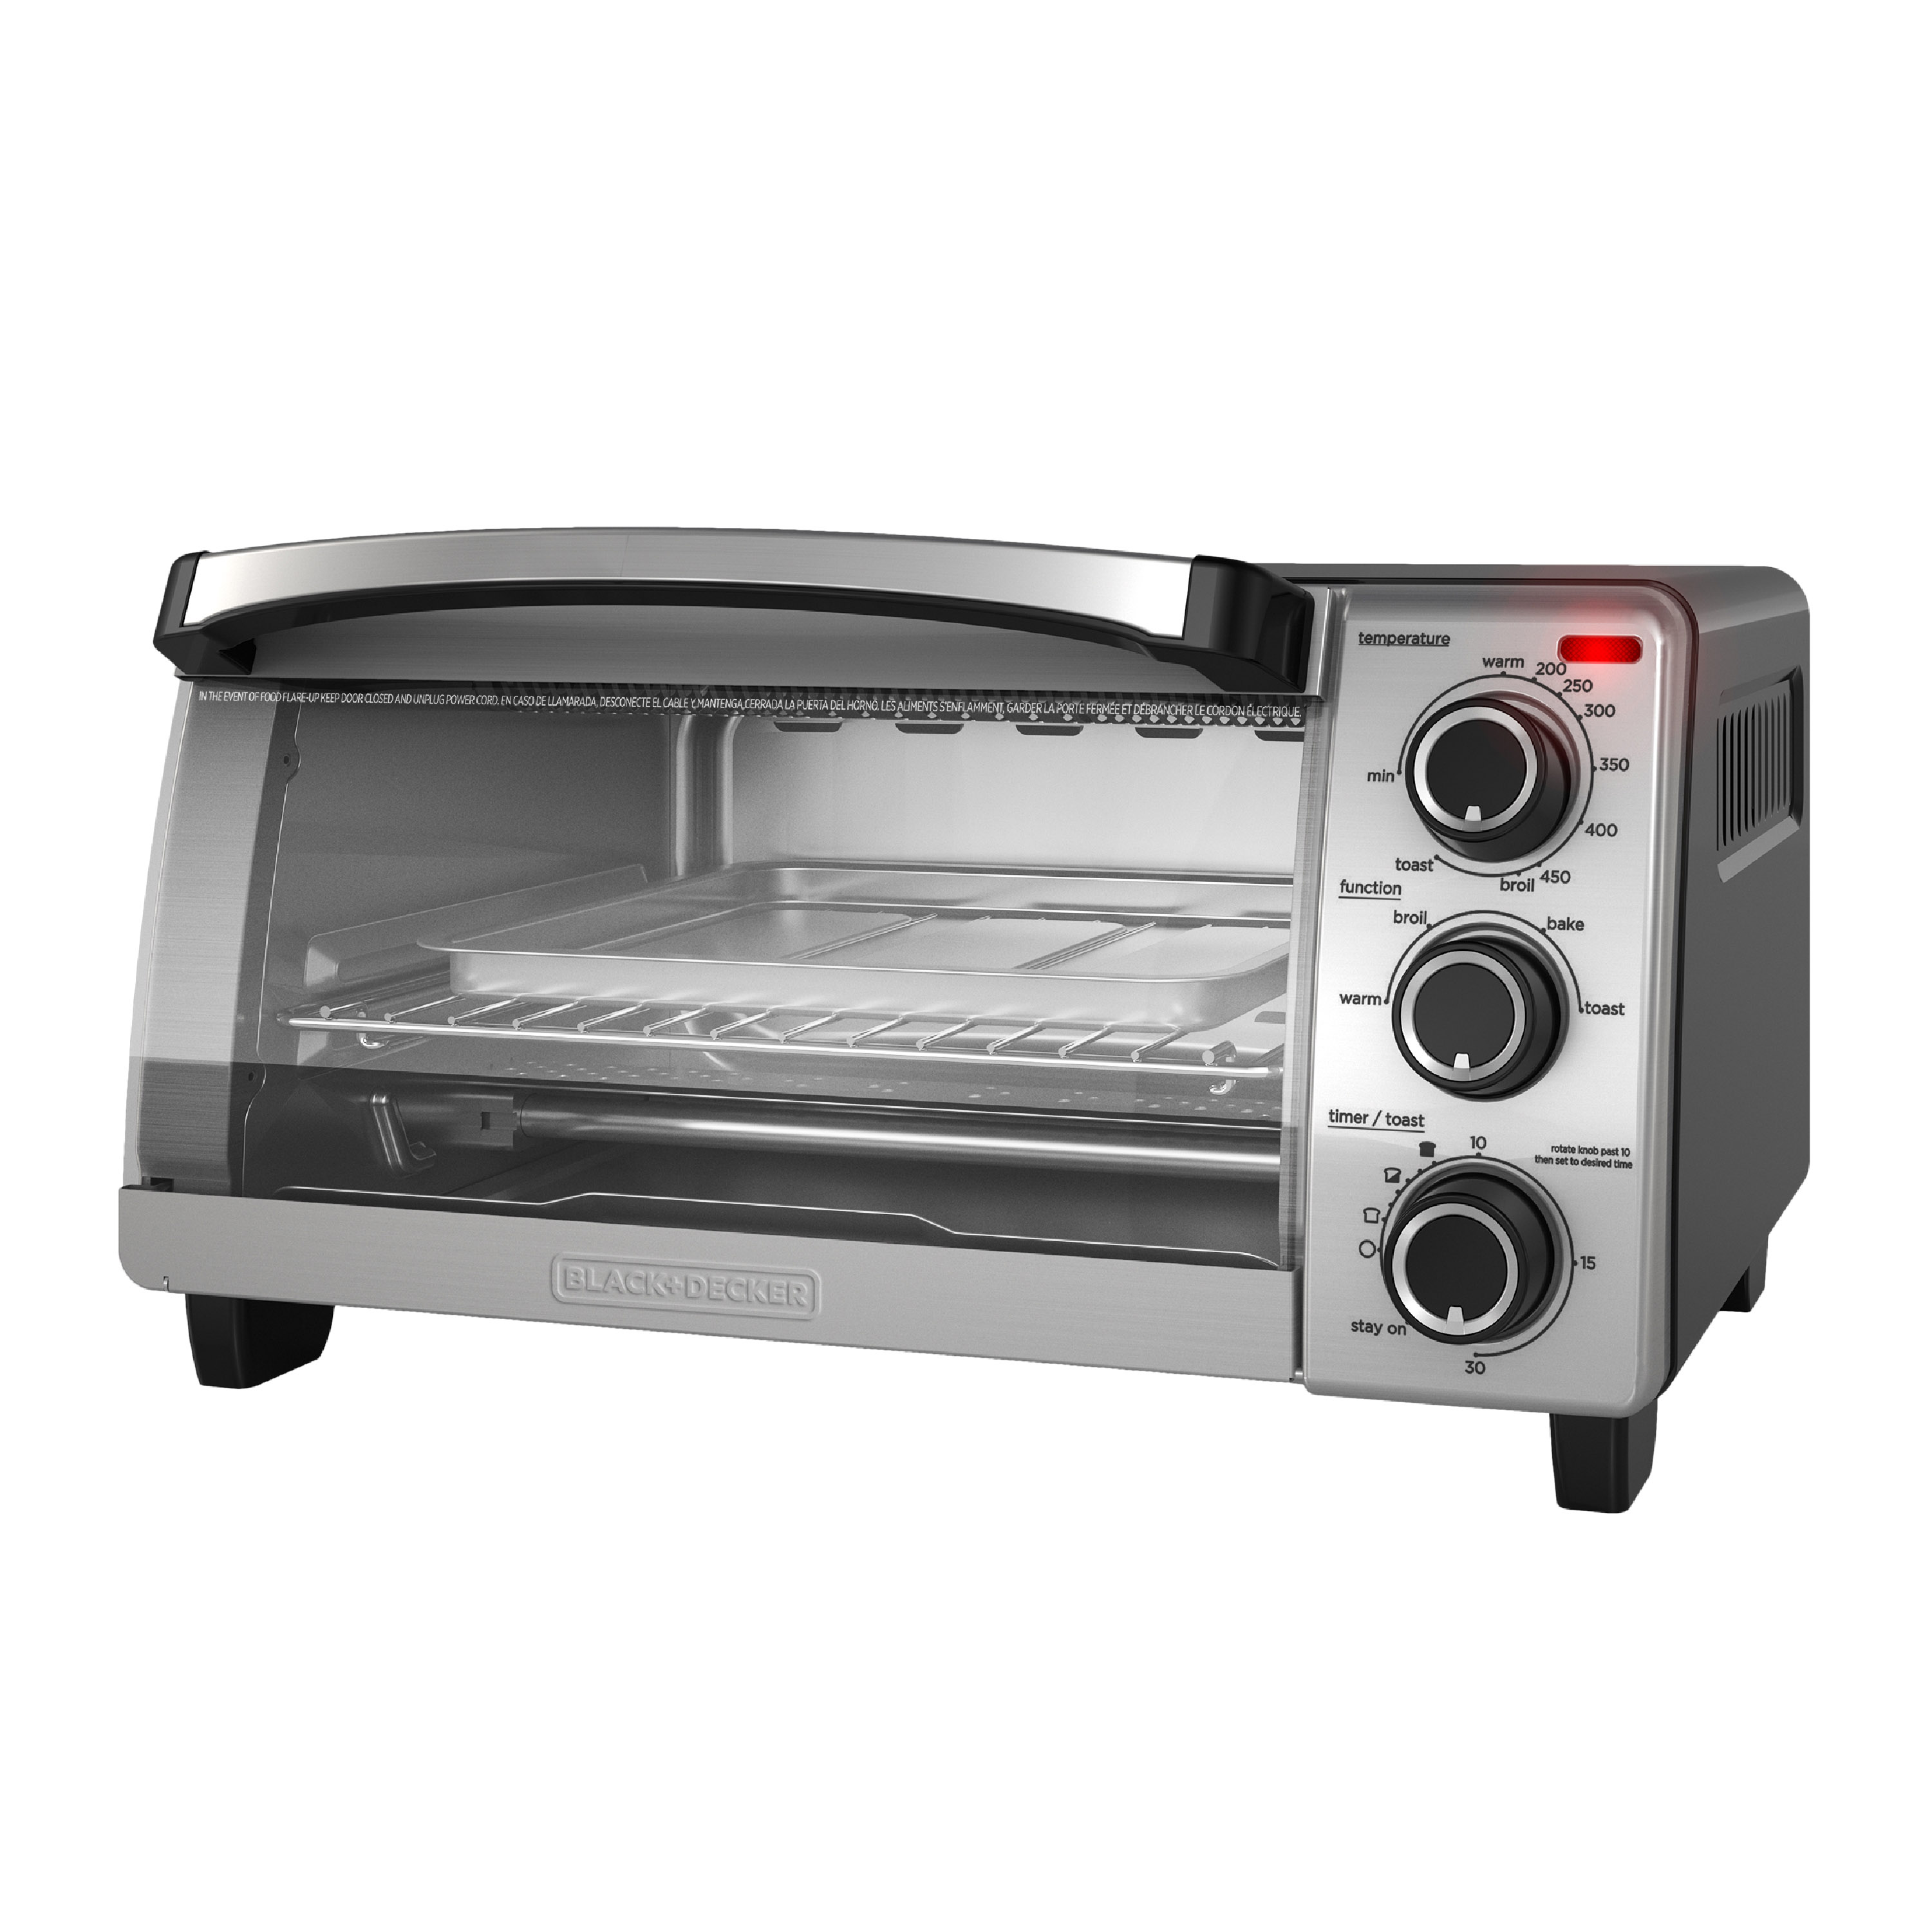 Buy a 4-Slice Toaster Oven, Countertop Toaster Oven TO1313SWD